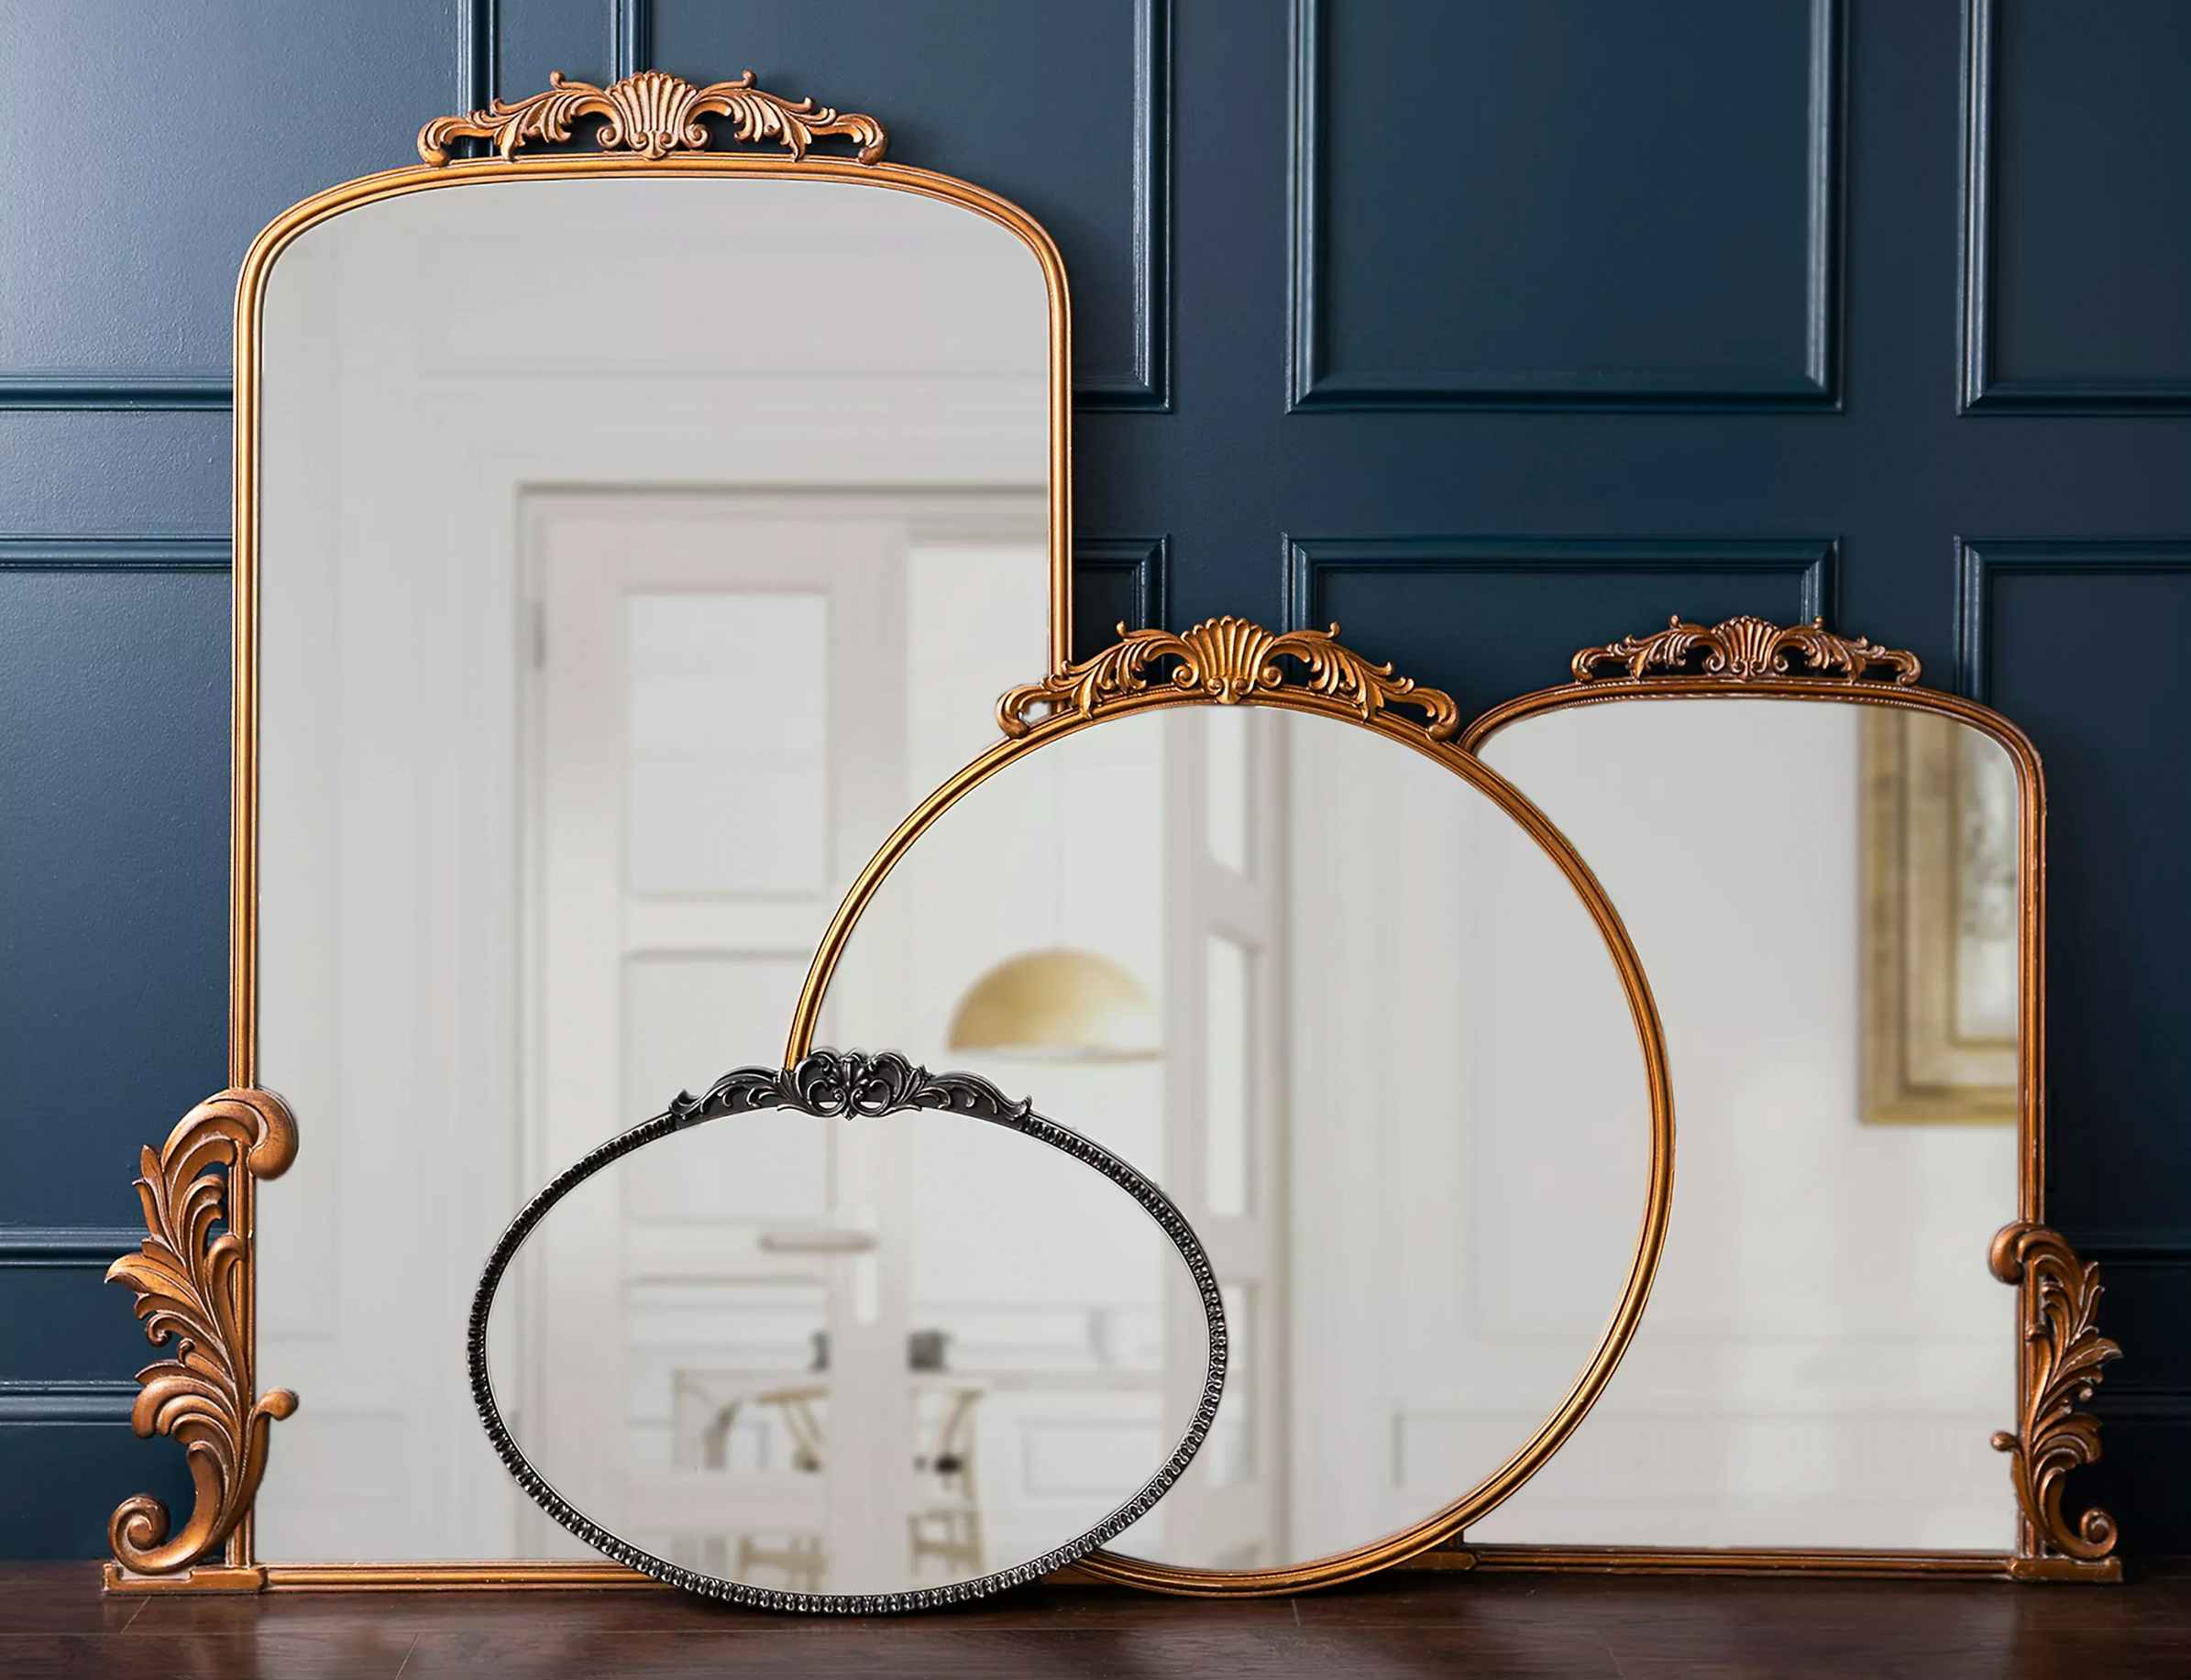 Gold Bordeaux Ornate Mirrors from Kirkland's Home leaning on a wall